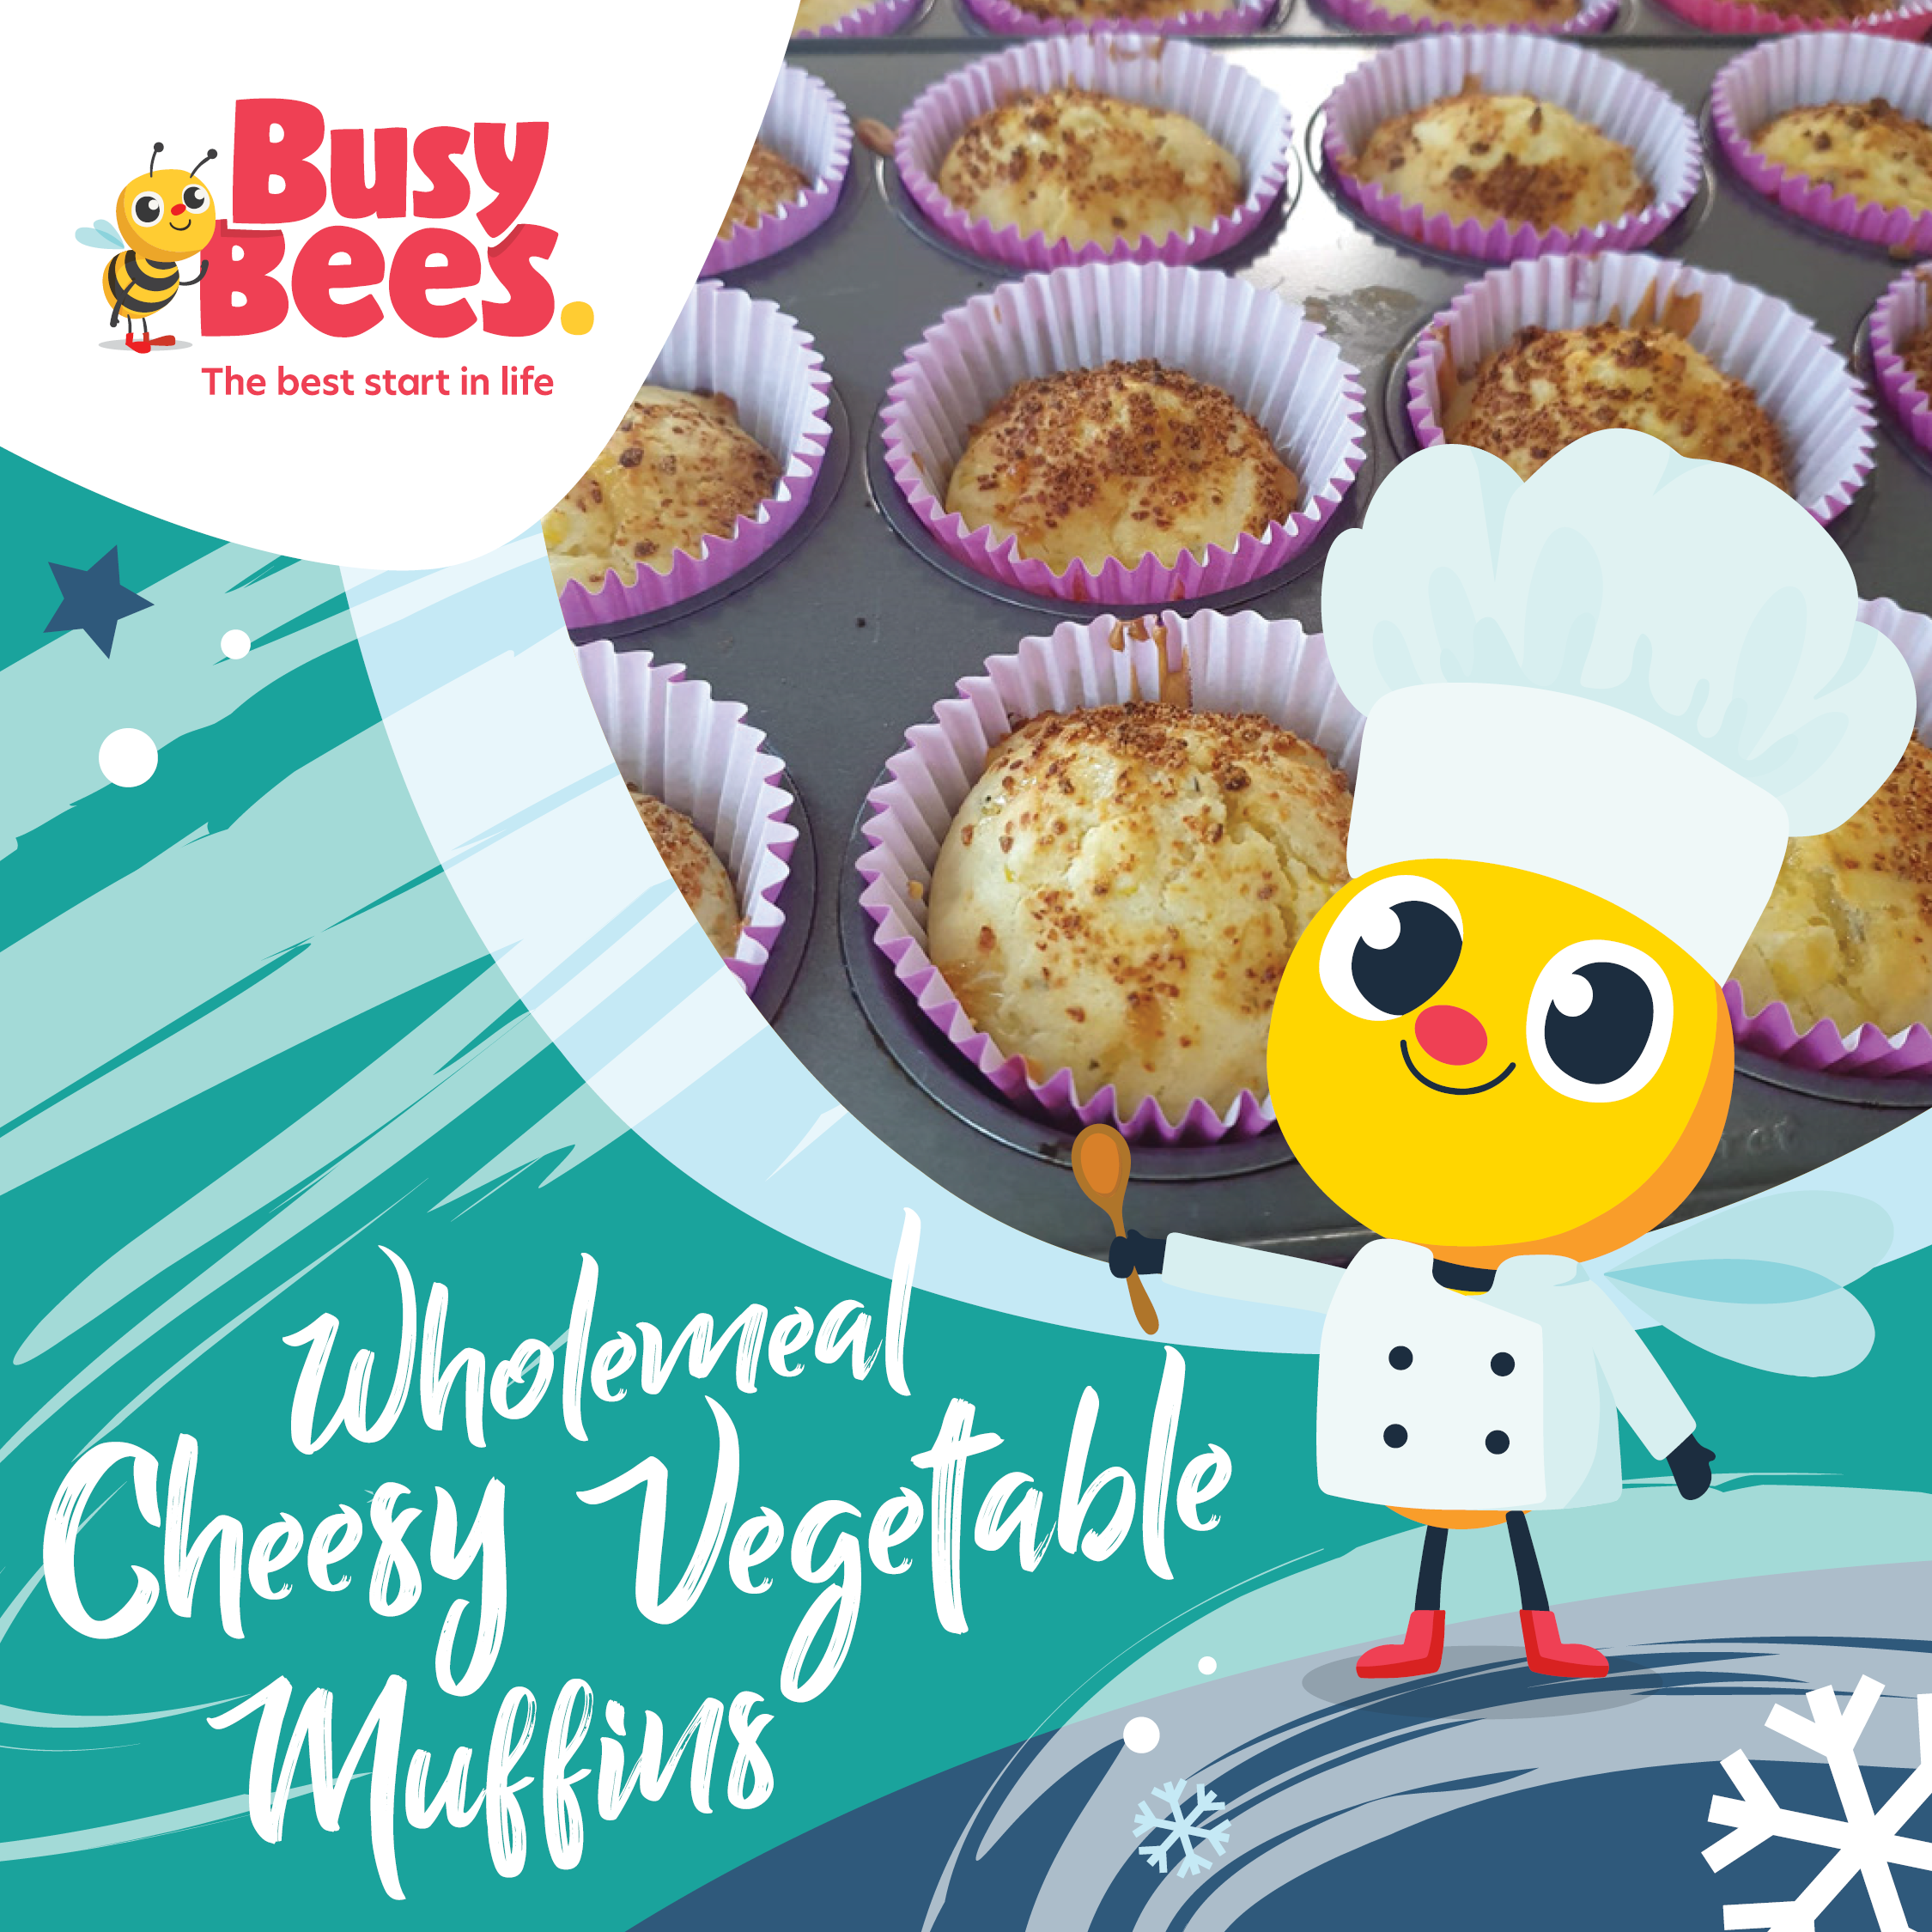 Wholemeal cheesy vegetable muffin recipe